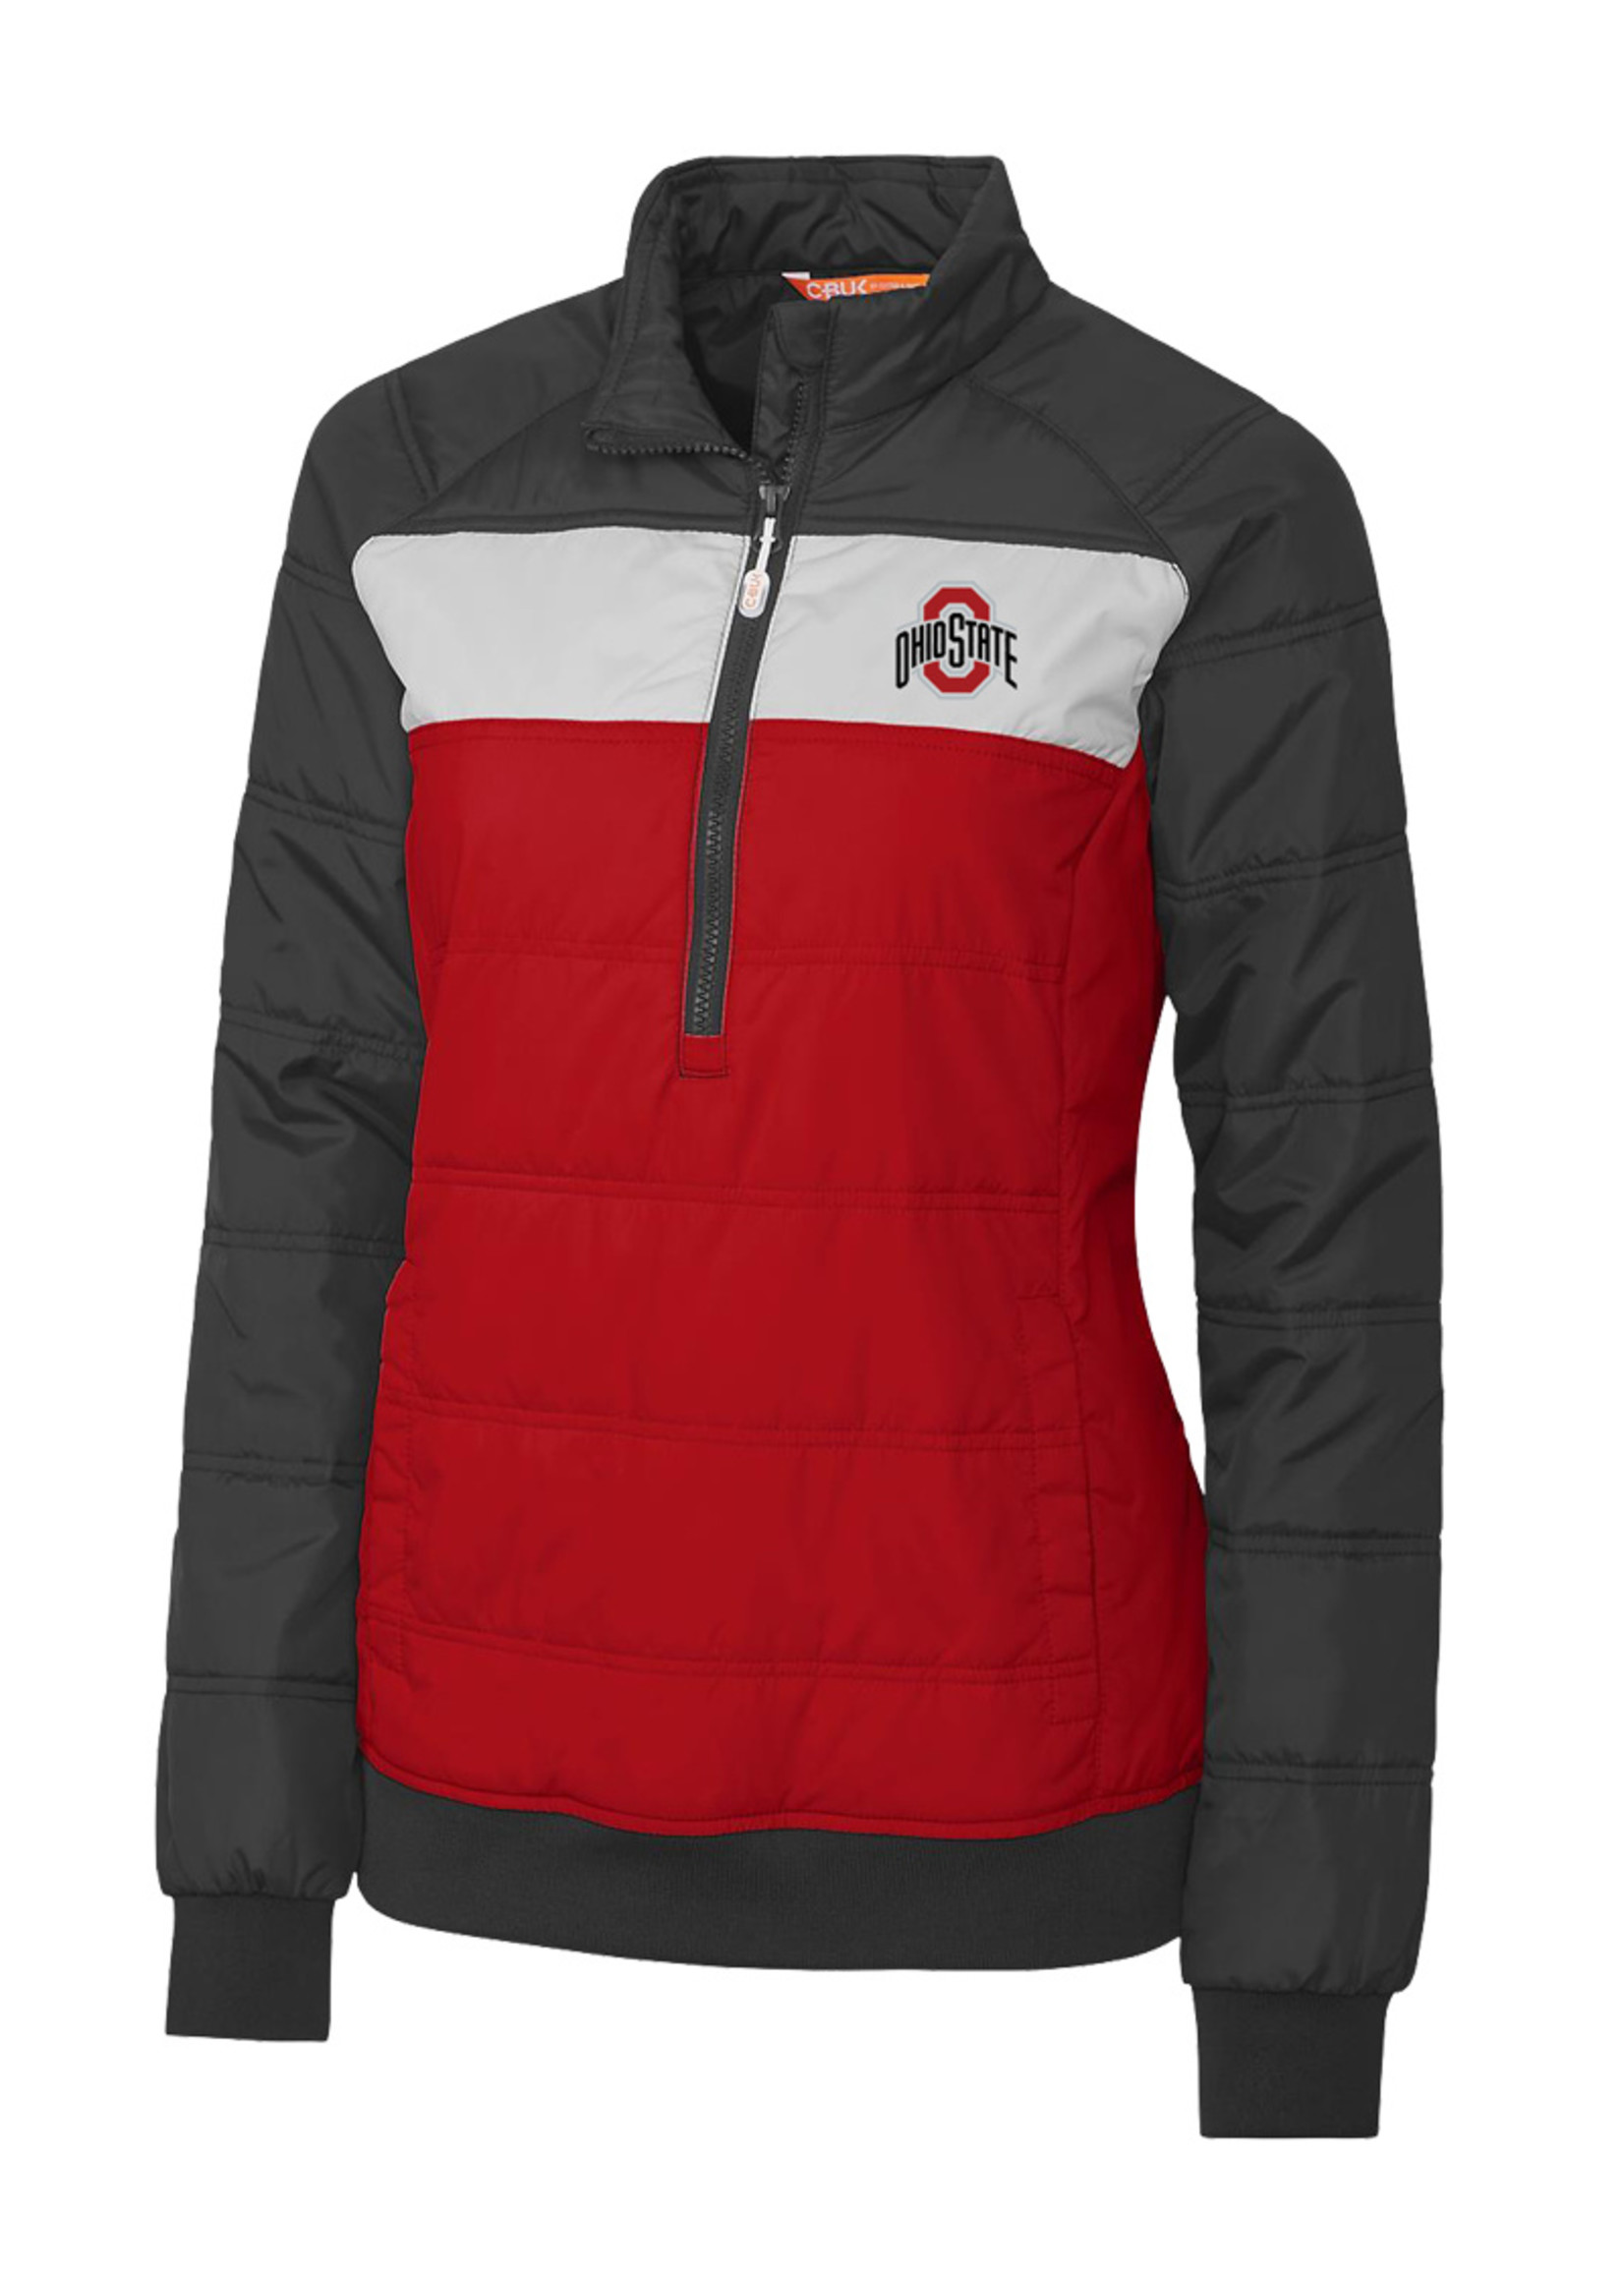 Cutter & Buck Ohio State Buckeyes Womens Thaw Pullover Jacket